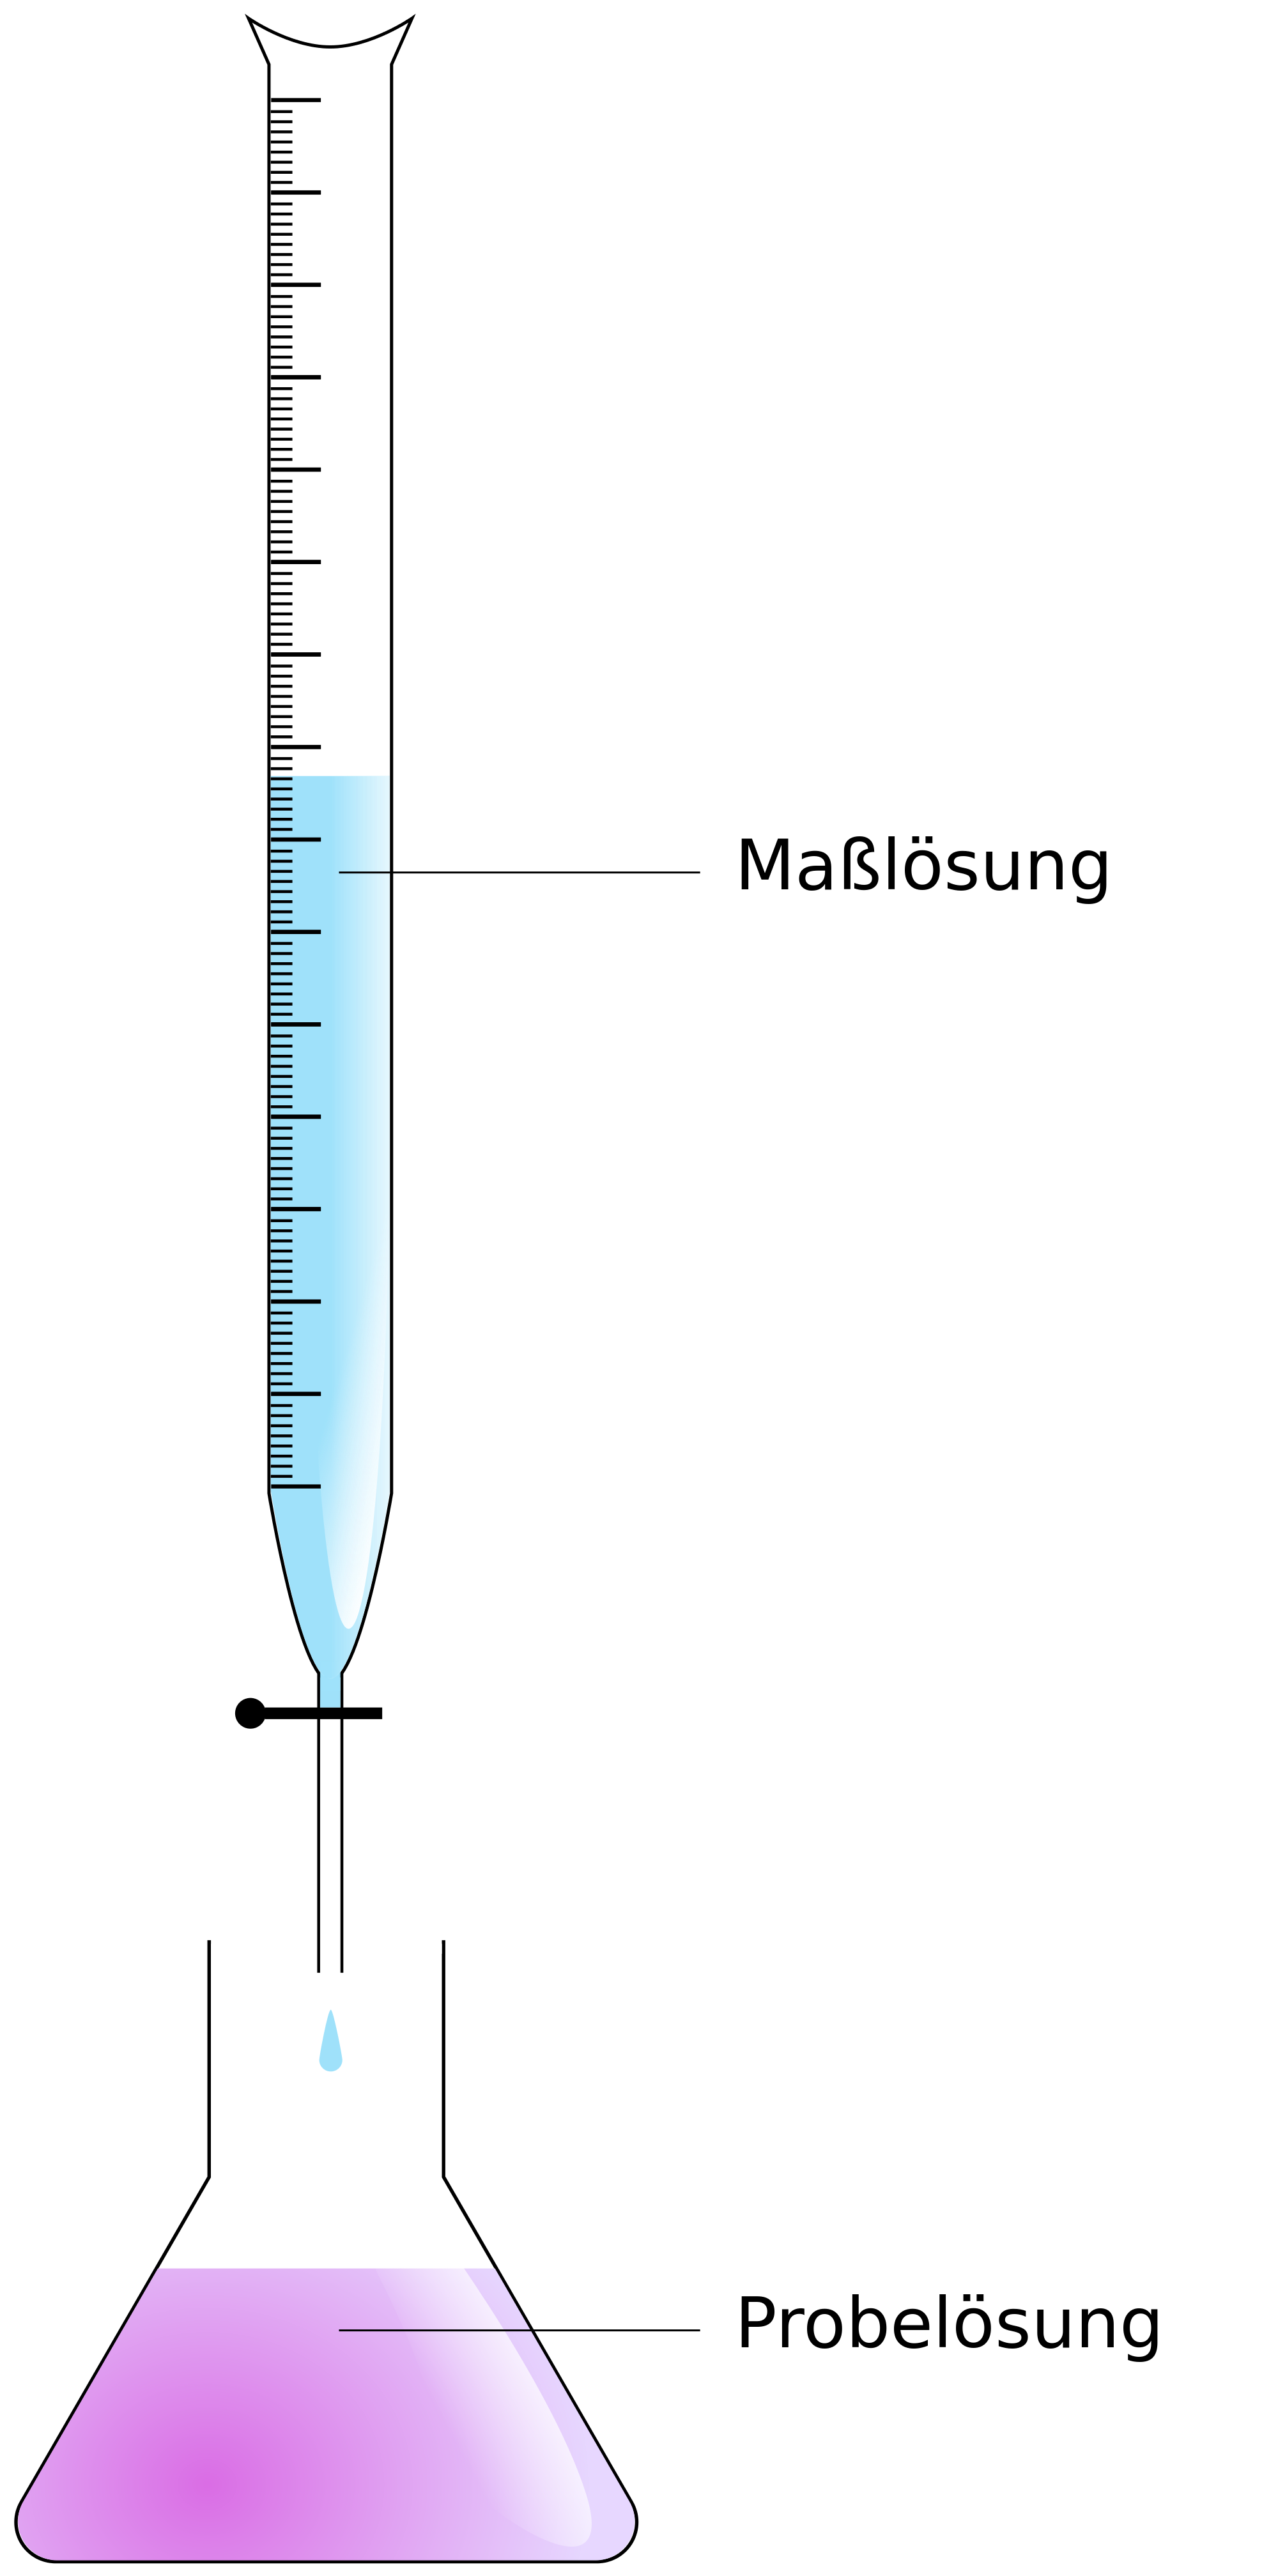 File:Titration.svg - Wikimedia Commons